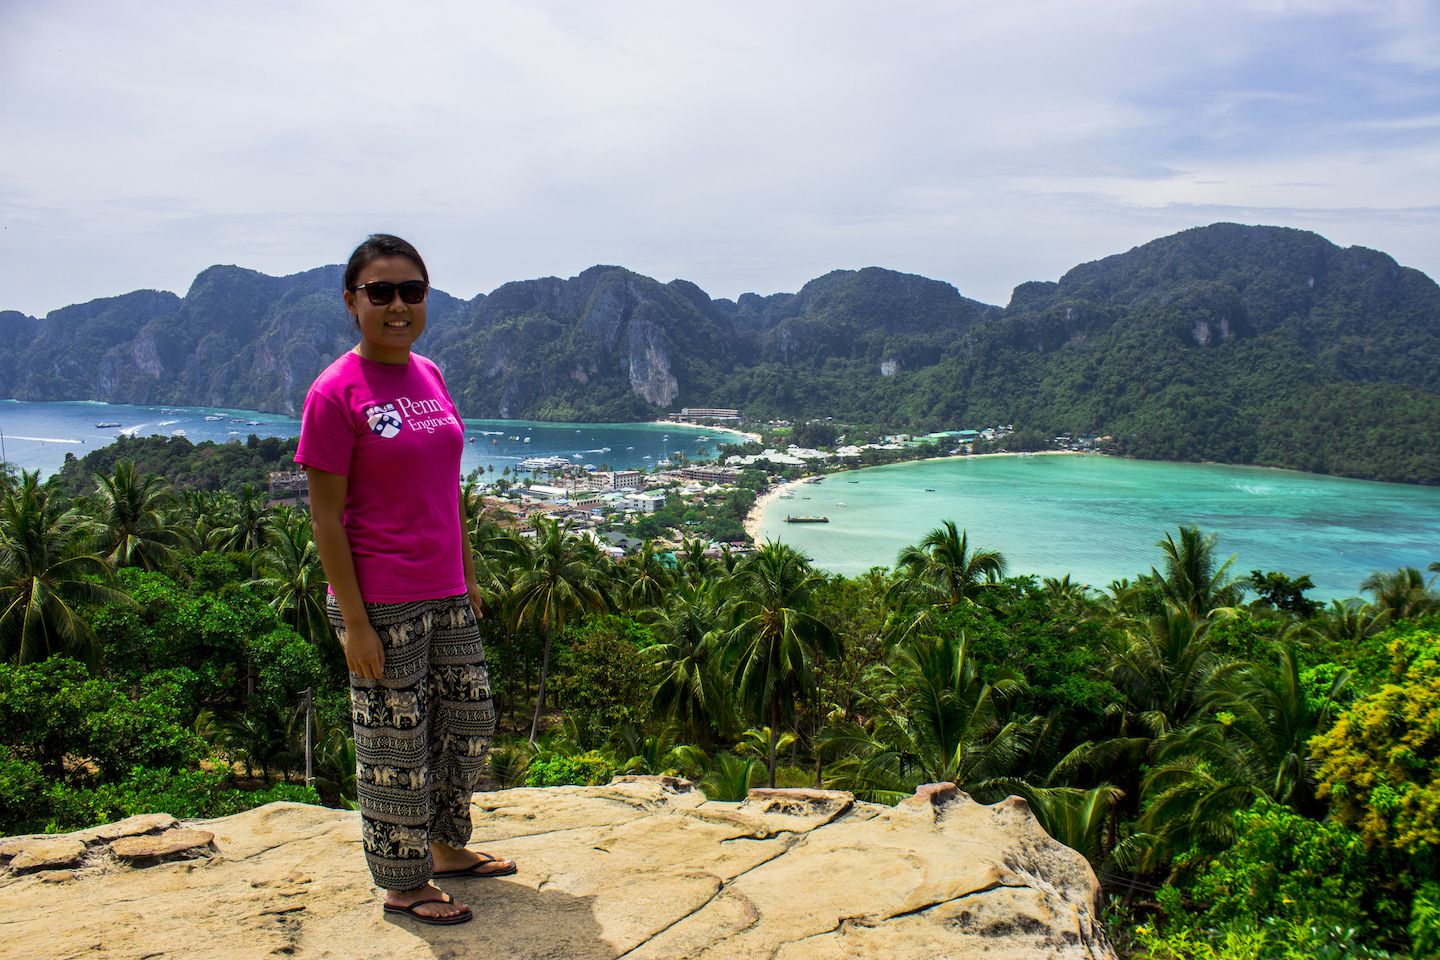 Julie at the view point on Koh Phi Phi, Thailand